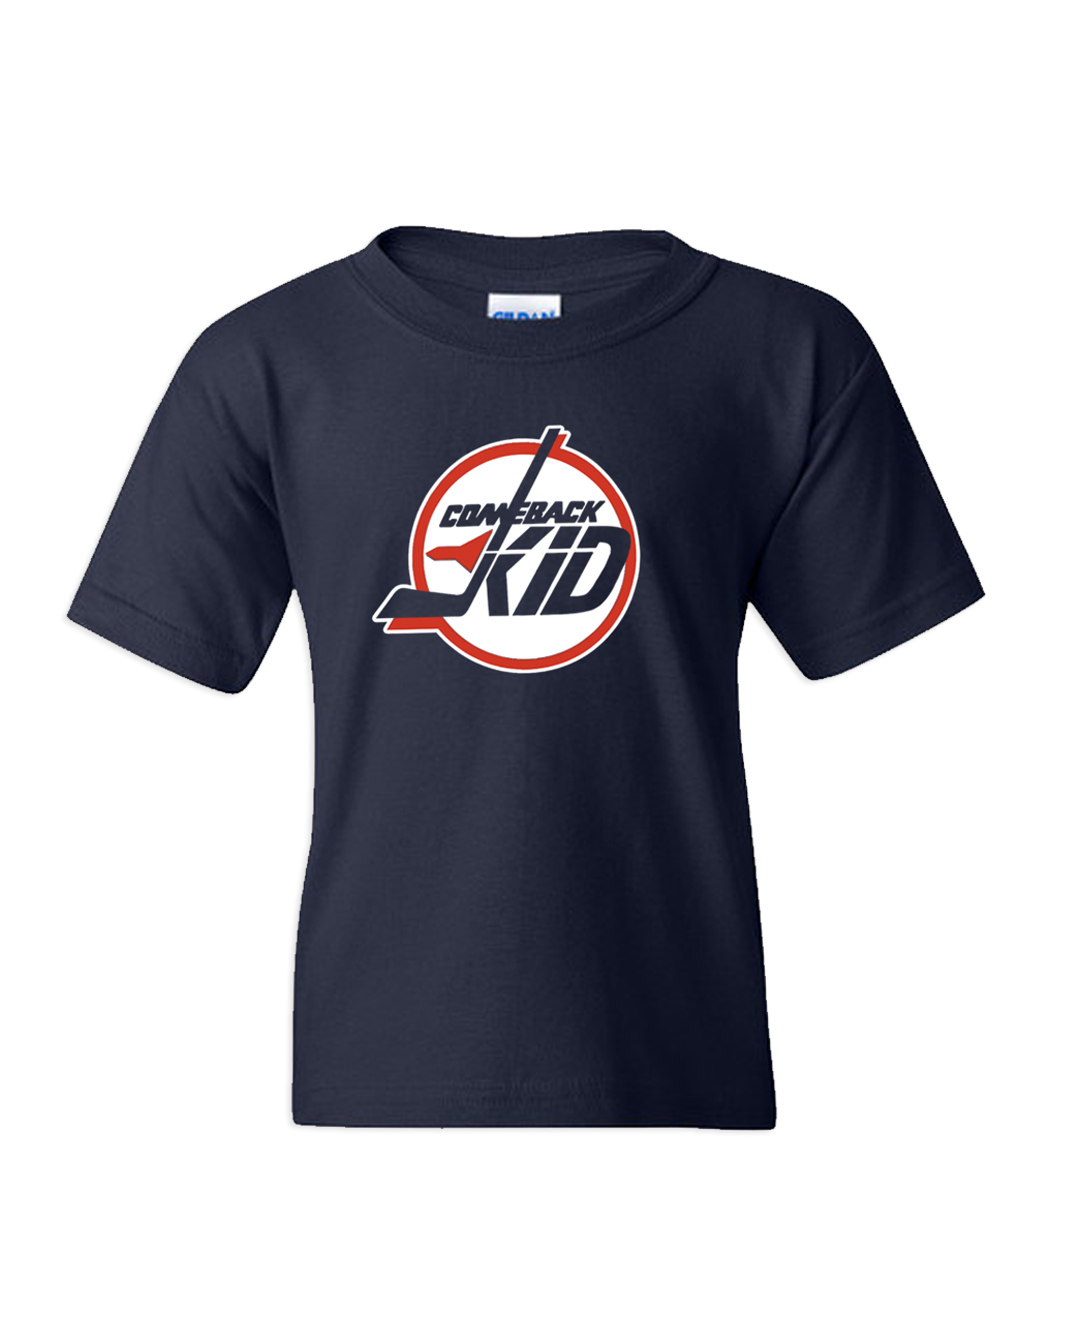 Jets Youth Tee